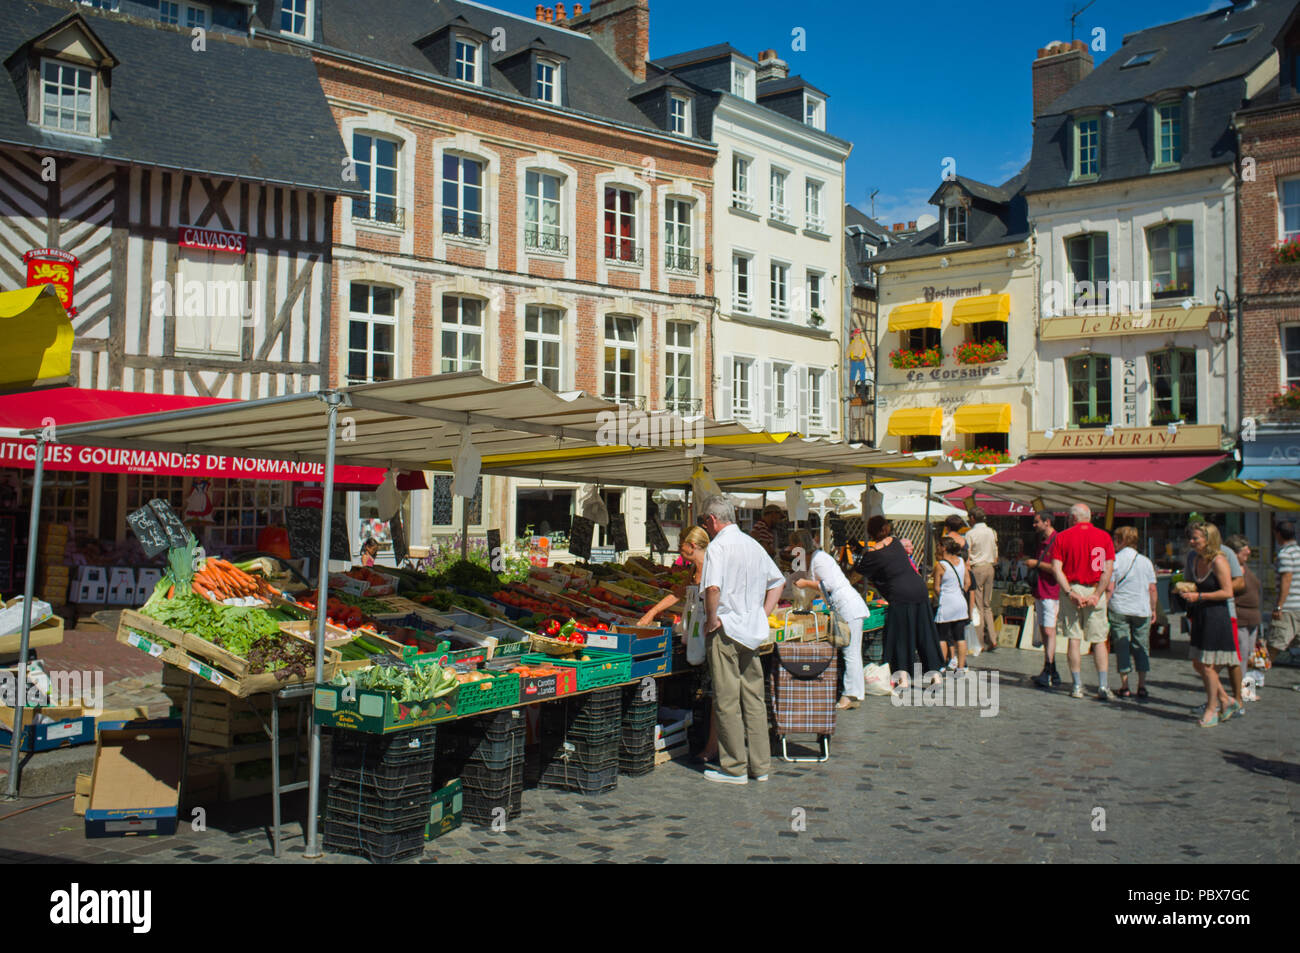 St. Catherine's Place on Market day in Honfleur, Normandy, France Stock ...